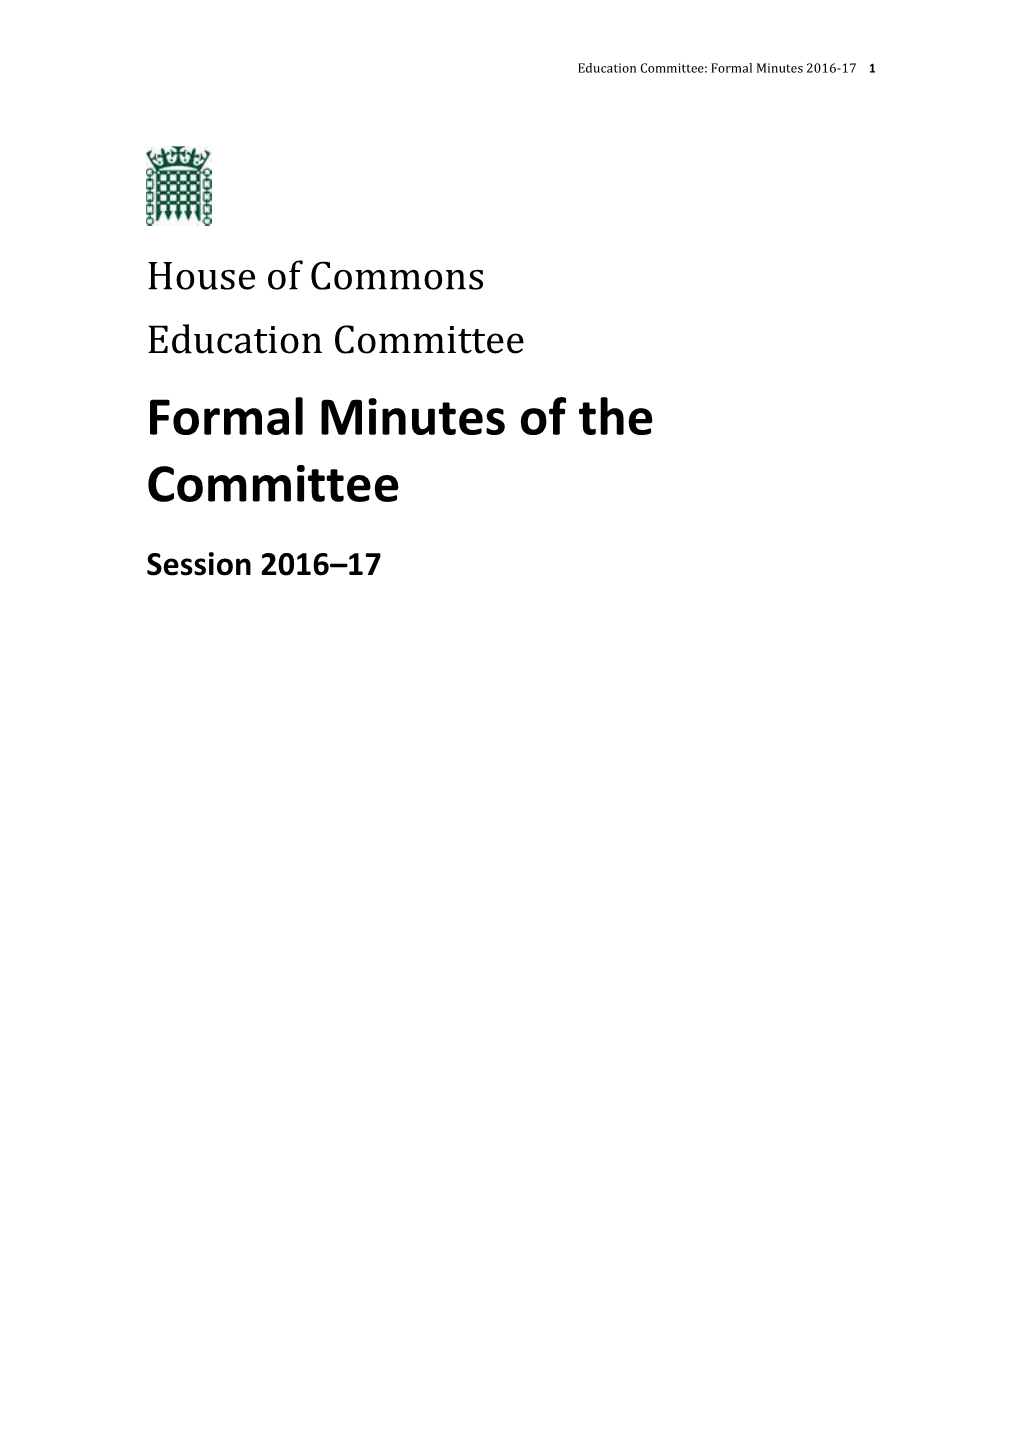 Education Formal Minutes 2016-17